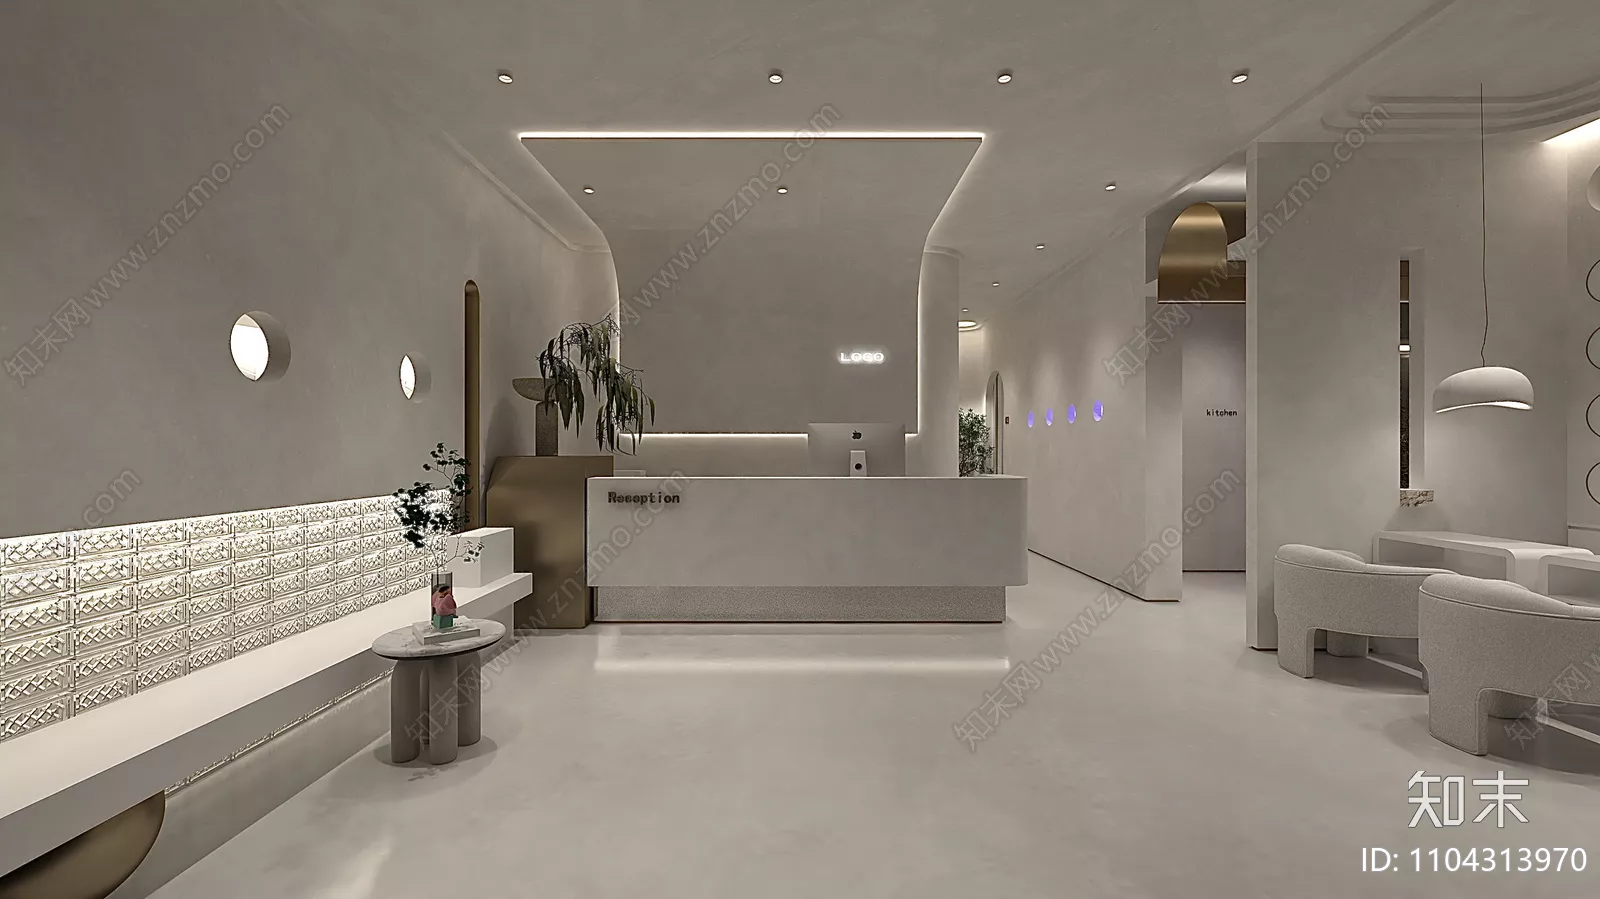 MODERN SPA AND BEAUTY - SKETCHUP 3D SCENE - VRAY OR ENSCAPE - ID13905